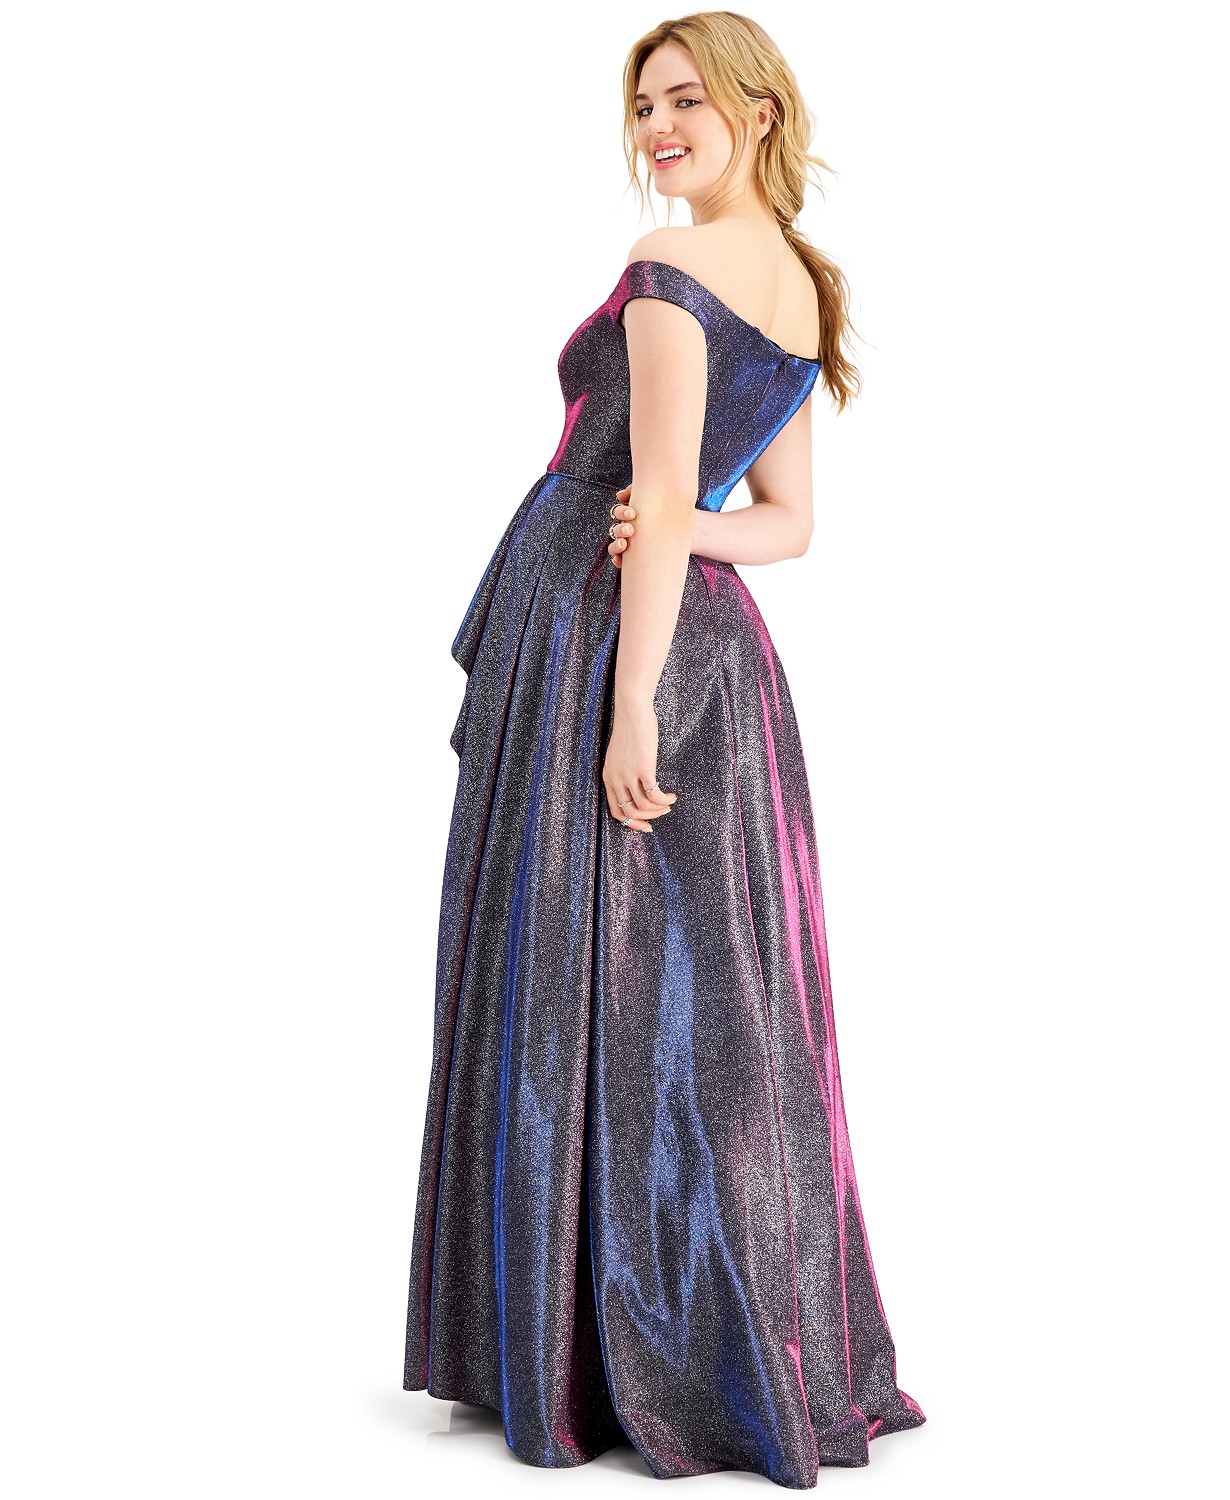 Macy's Prom Off the shoulder glitter Gown fushia color back-side